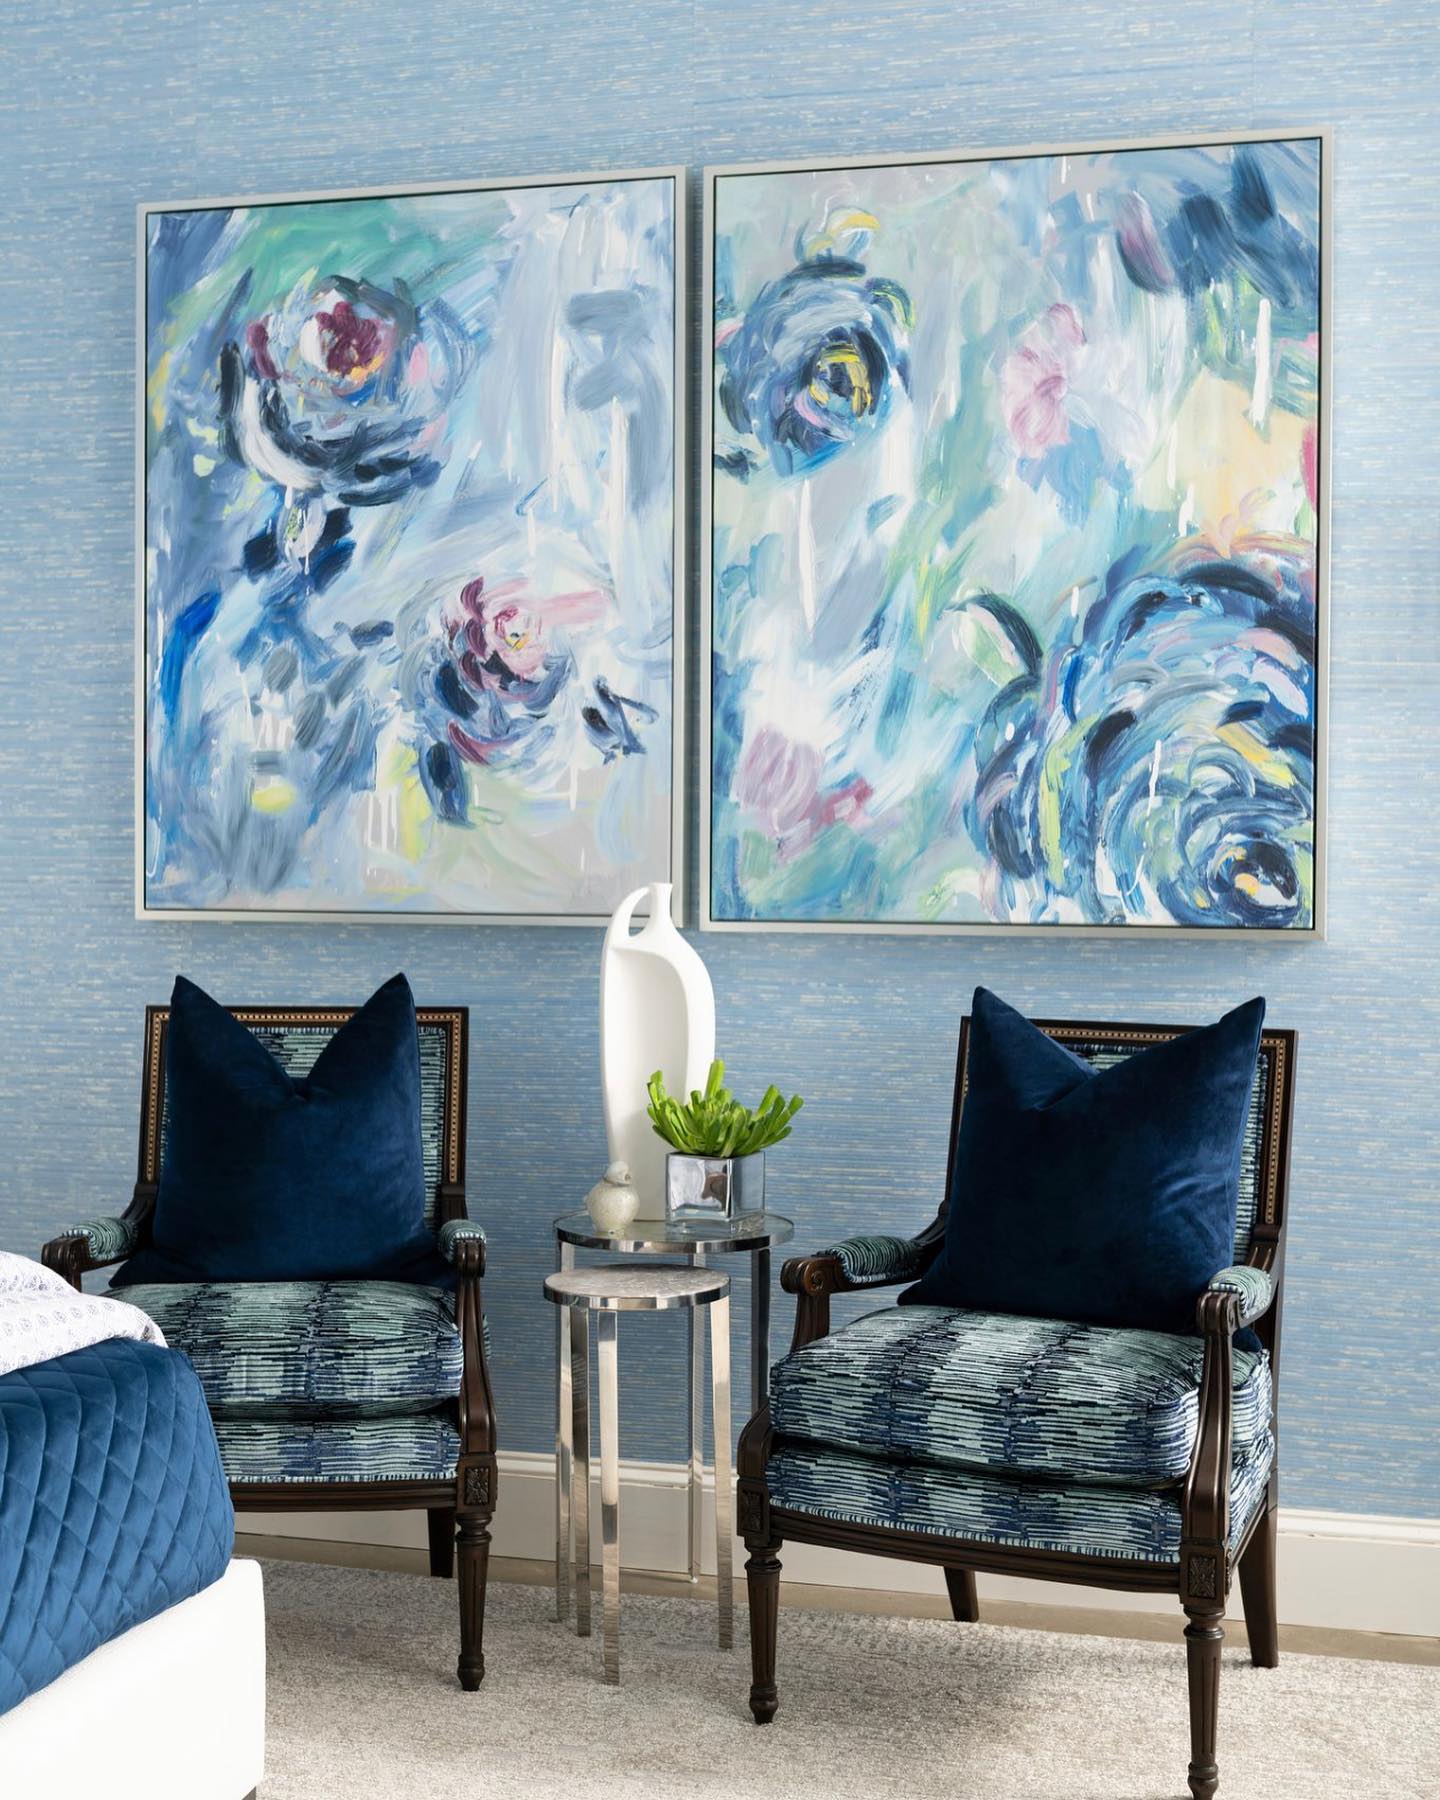 Fabulous art can be a jumping off point for a room’s design or the final touch that brings the room together. We love how this diptych layers in color and adds depth to this bedroom design by #ibbdesigner Karen Holloway. All furnishings & accessories shown are available thru our store in #Frisco. #interiordesign #Dallasdesign #designerfurnishings #accessories #roomstyling #shophomedecor #roomswelove #bedroomdesign #blueinteriors #teamIBB #ibbdesign